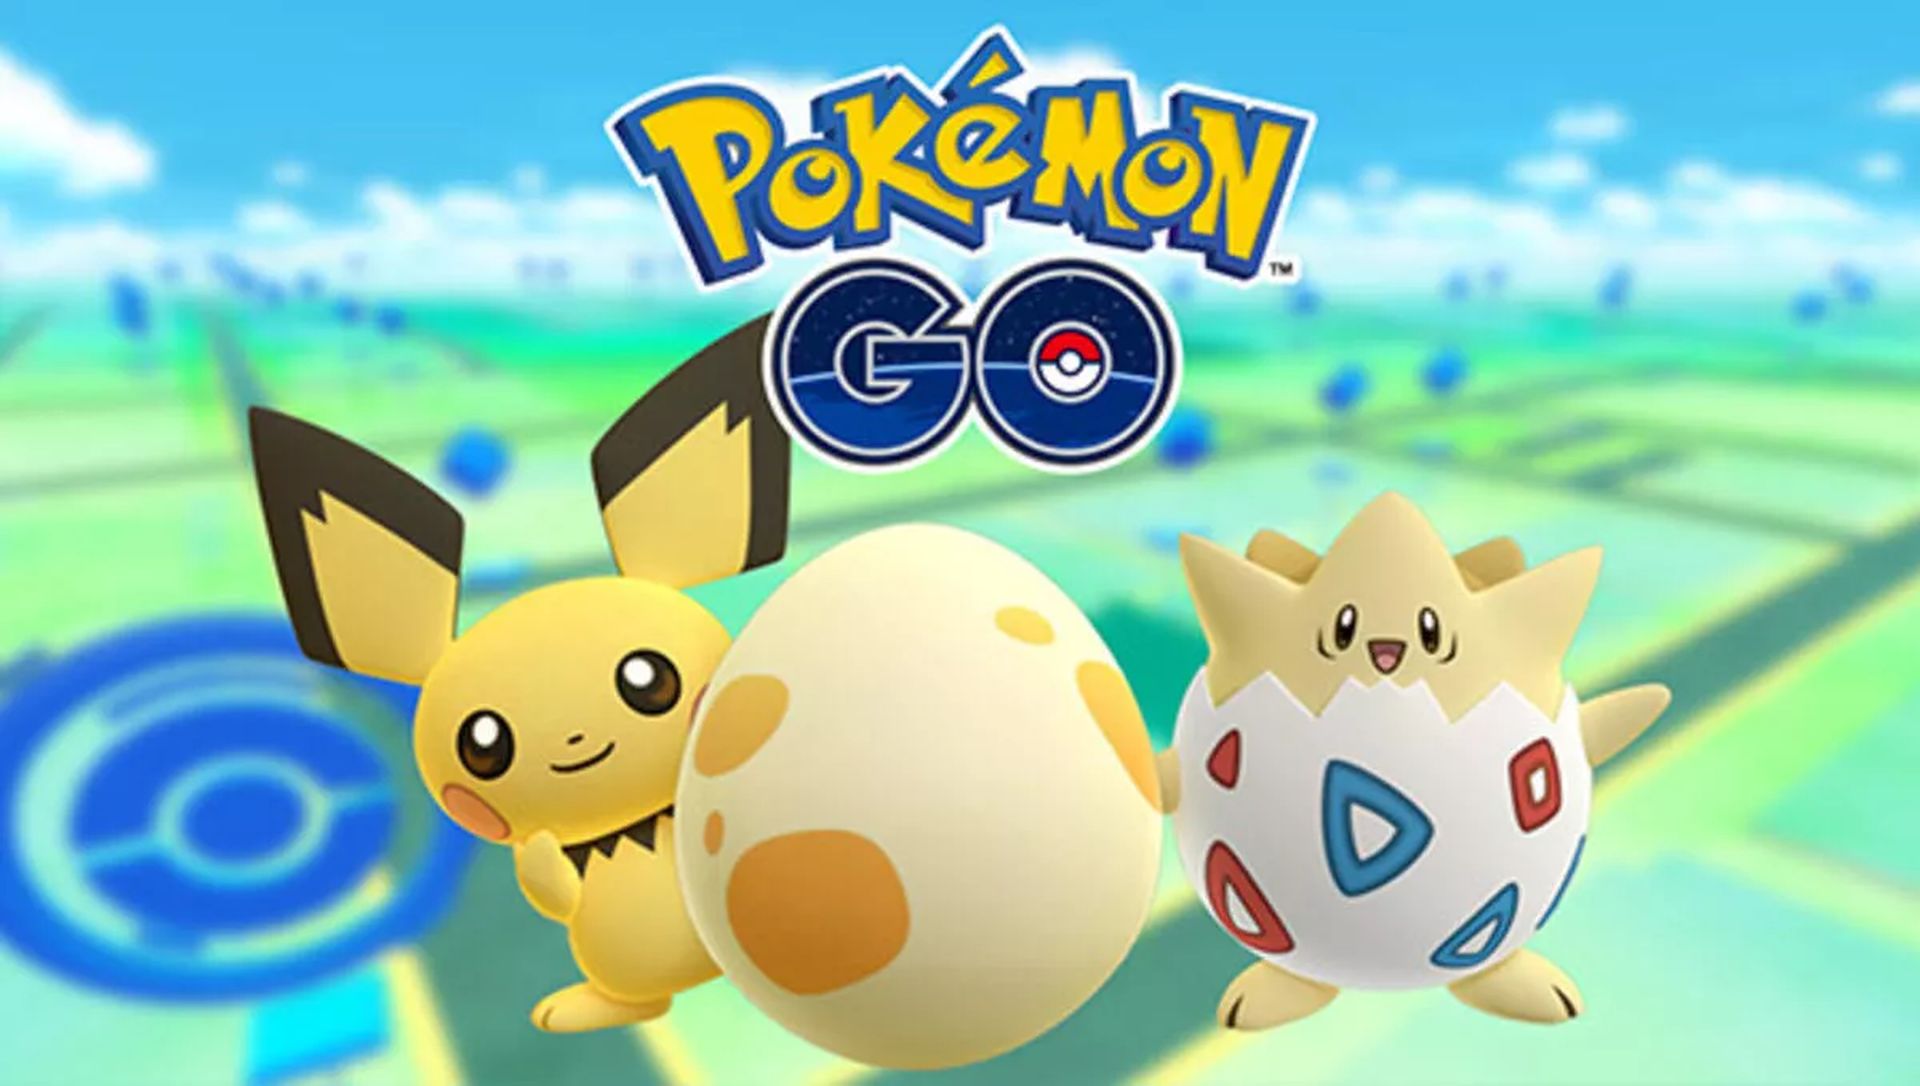 All Pokemon Go codes for August 2022: Free loots!